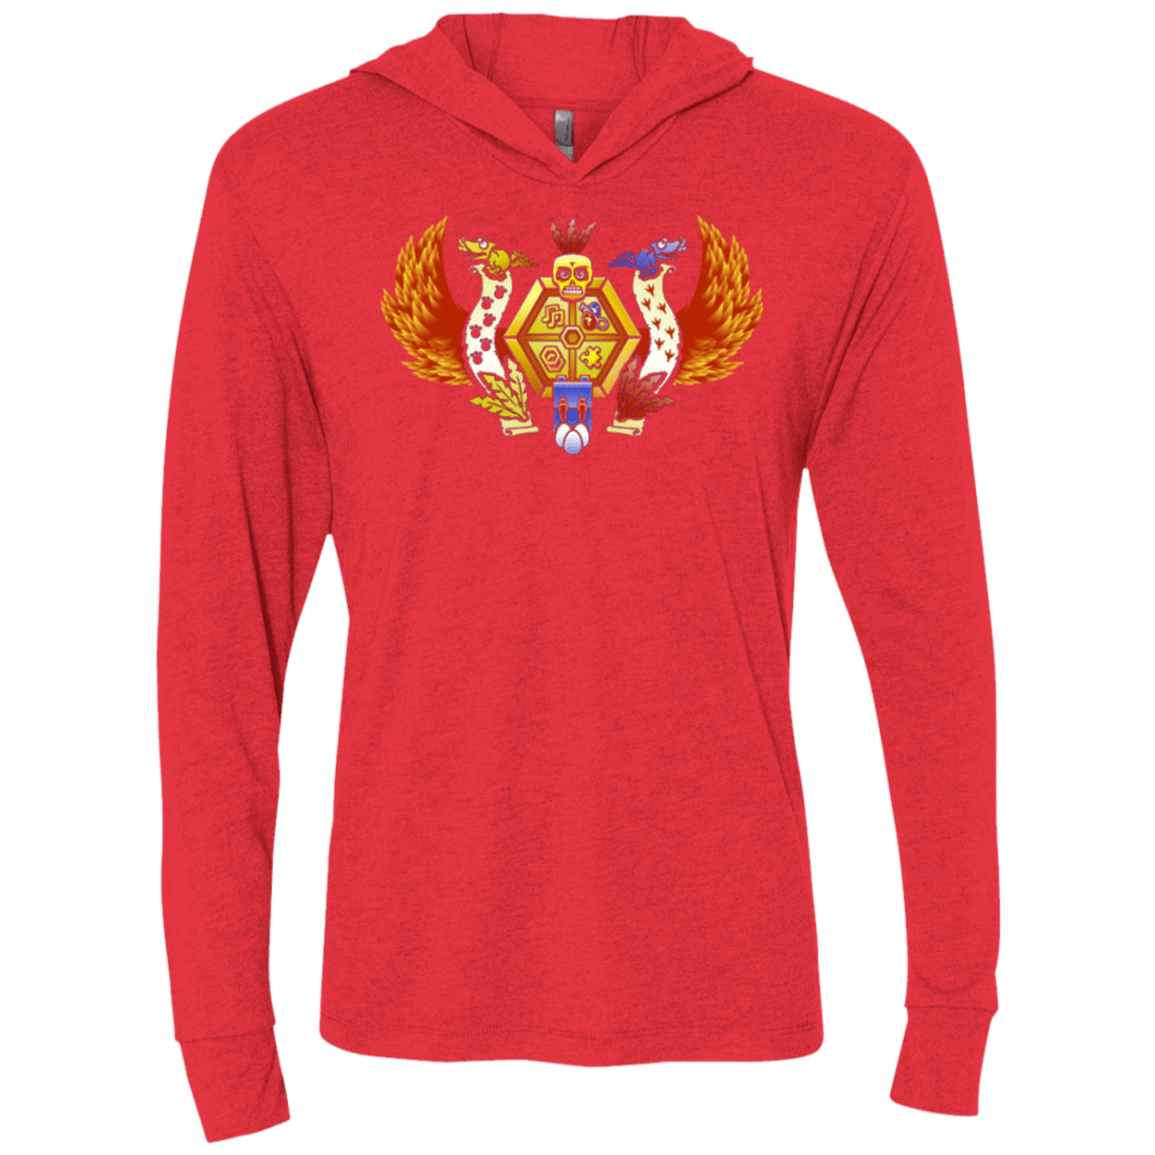 T-Shirts Vintage Red / X-Small Treasure Hunters Crest Triblend Long Sleeve Hoodie Tee